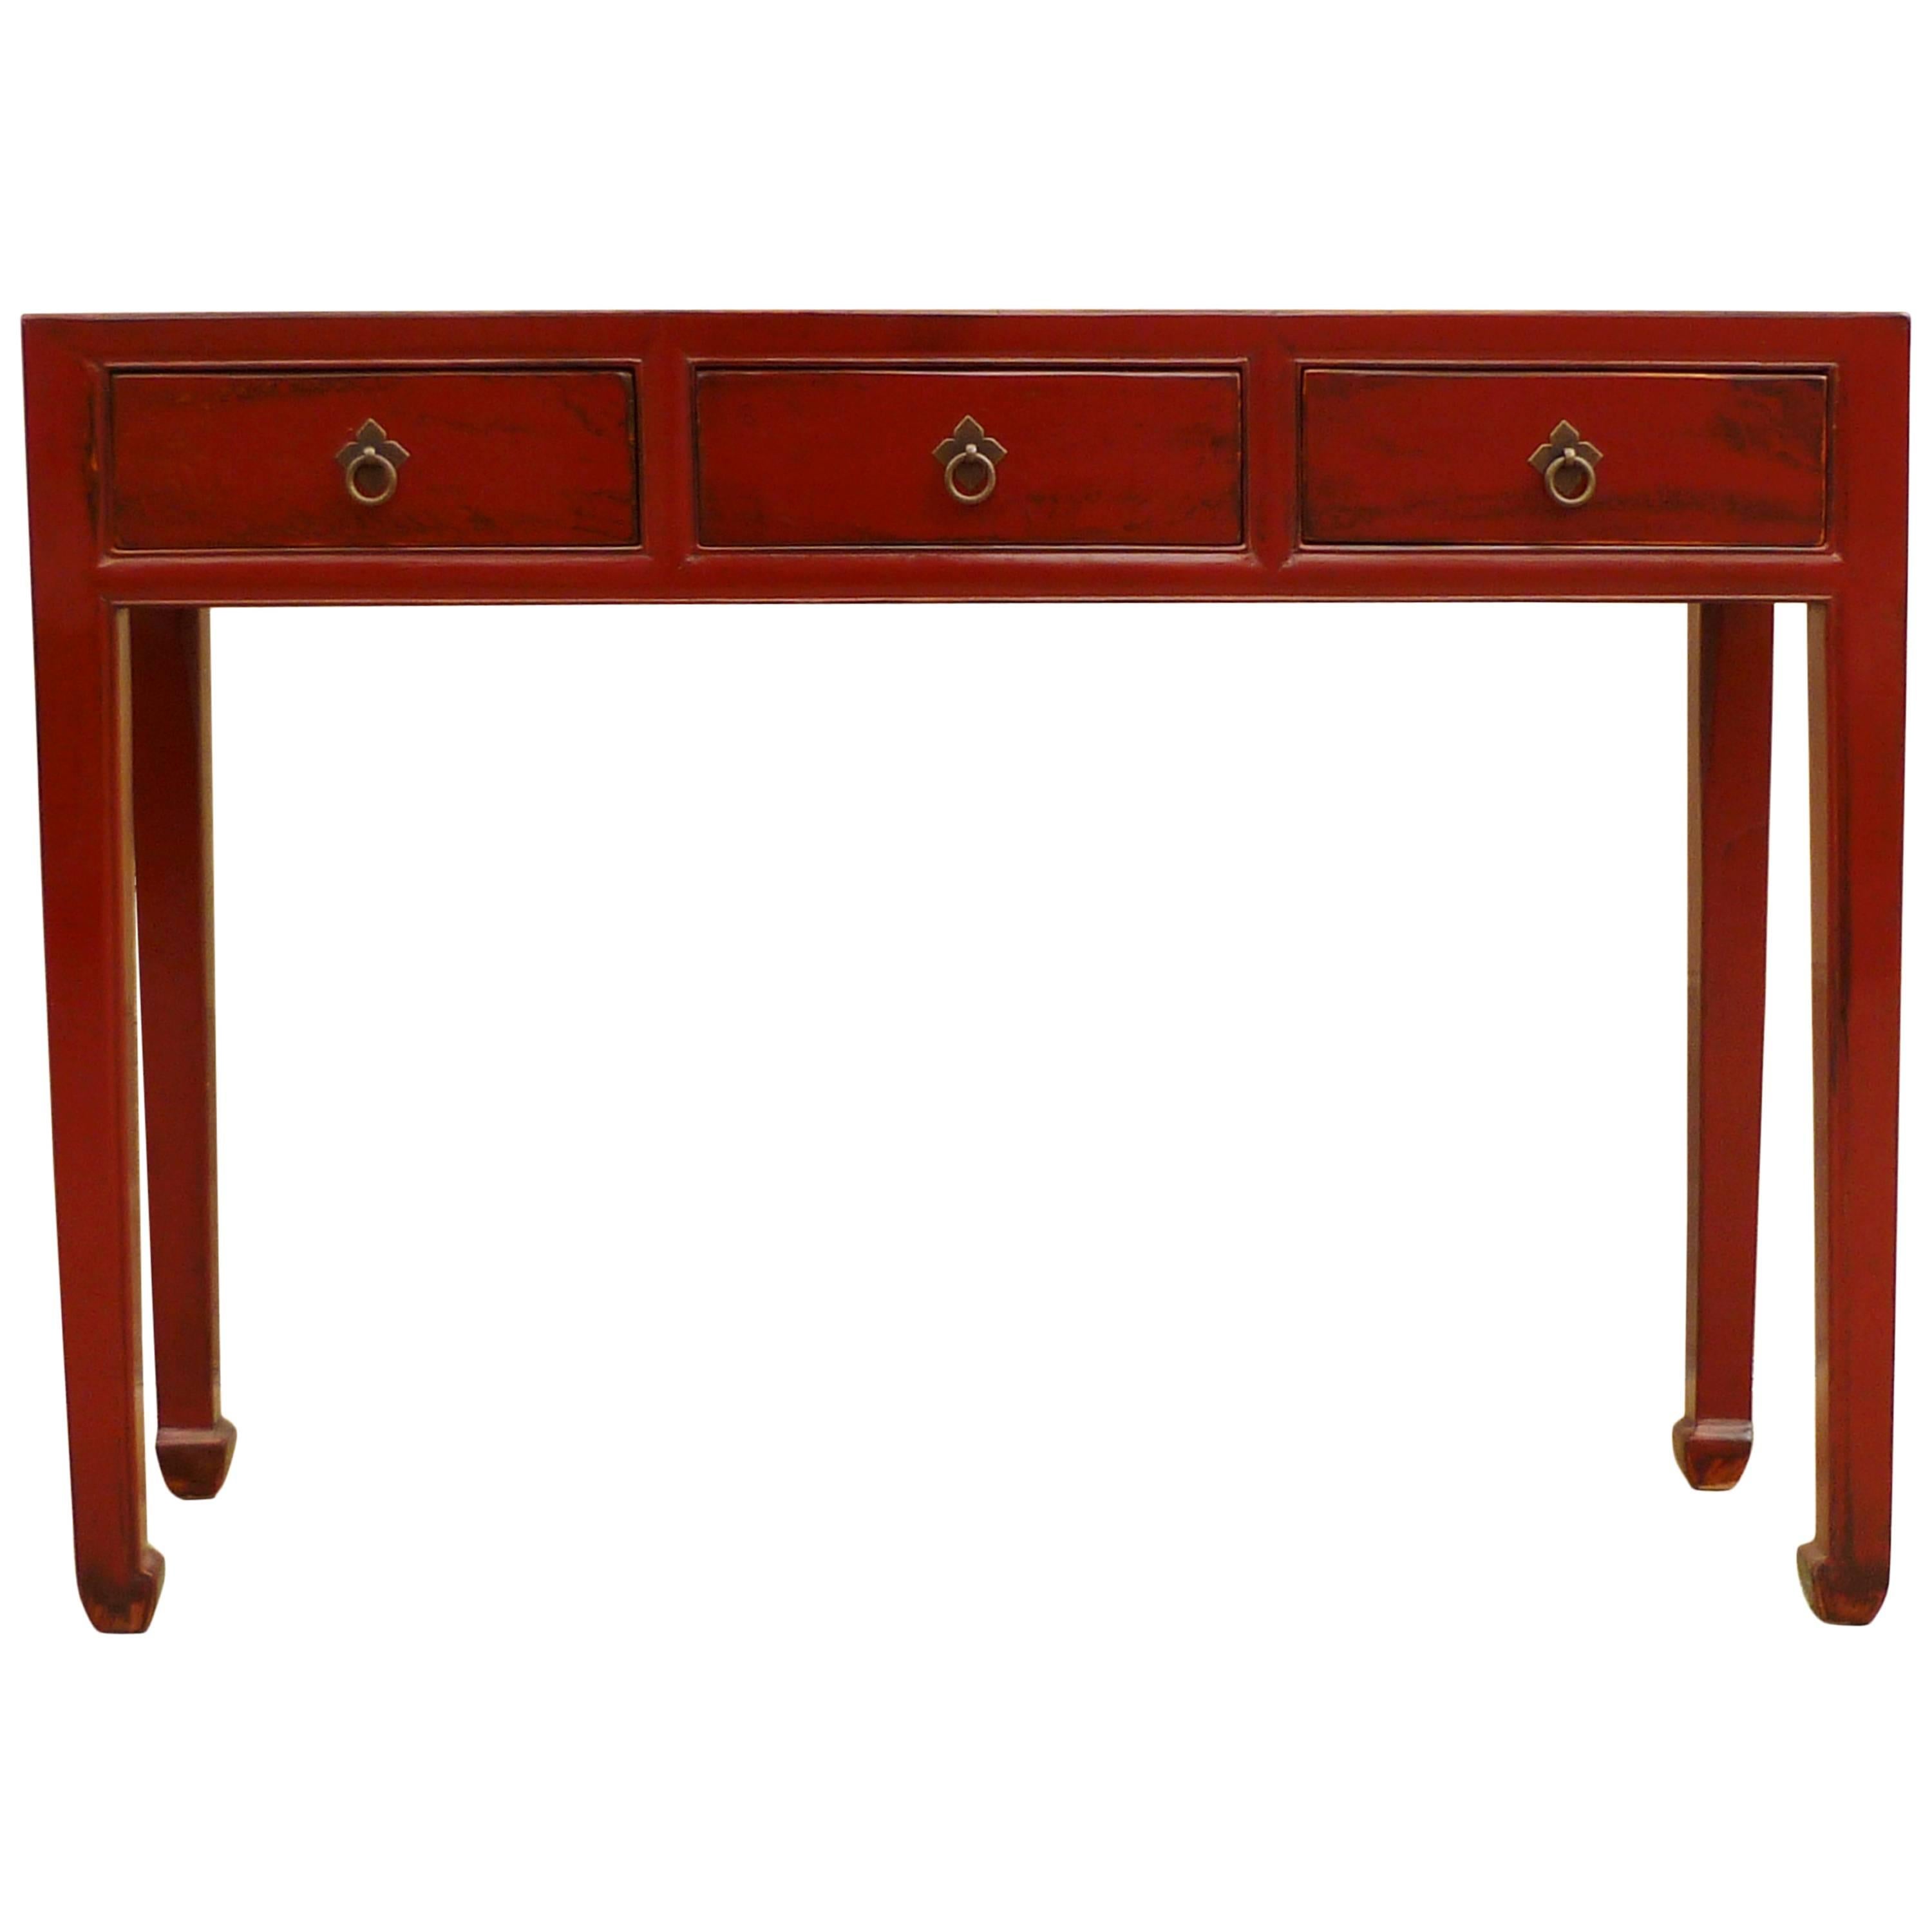 Red Lacquer Table with Three-Drawers